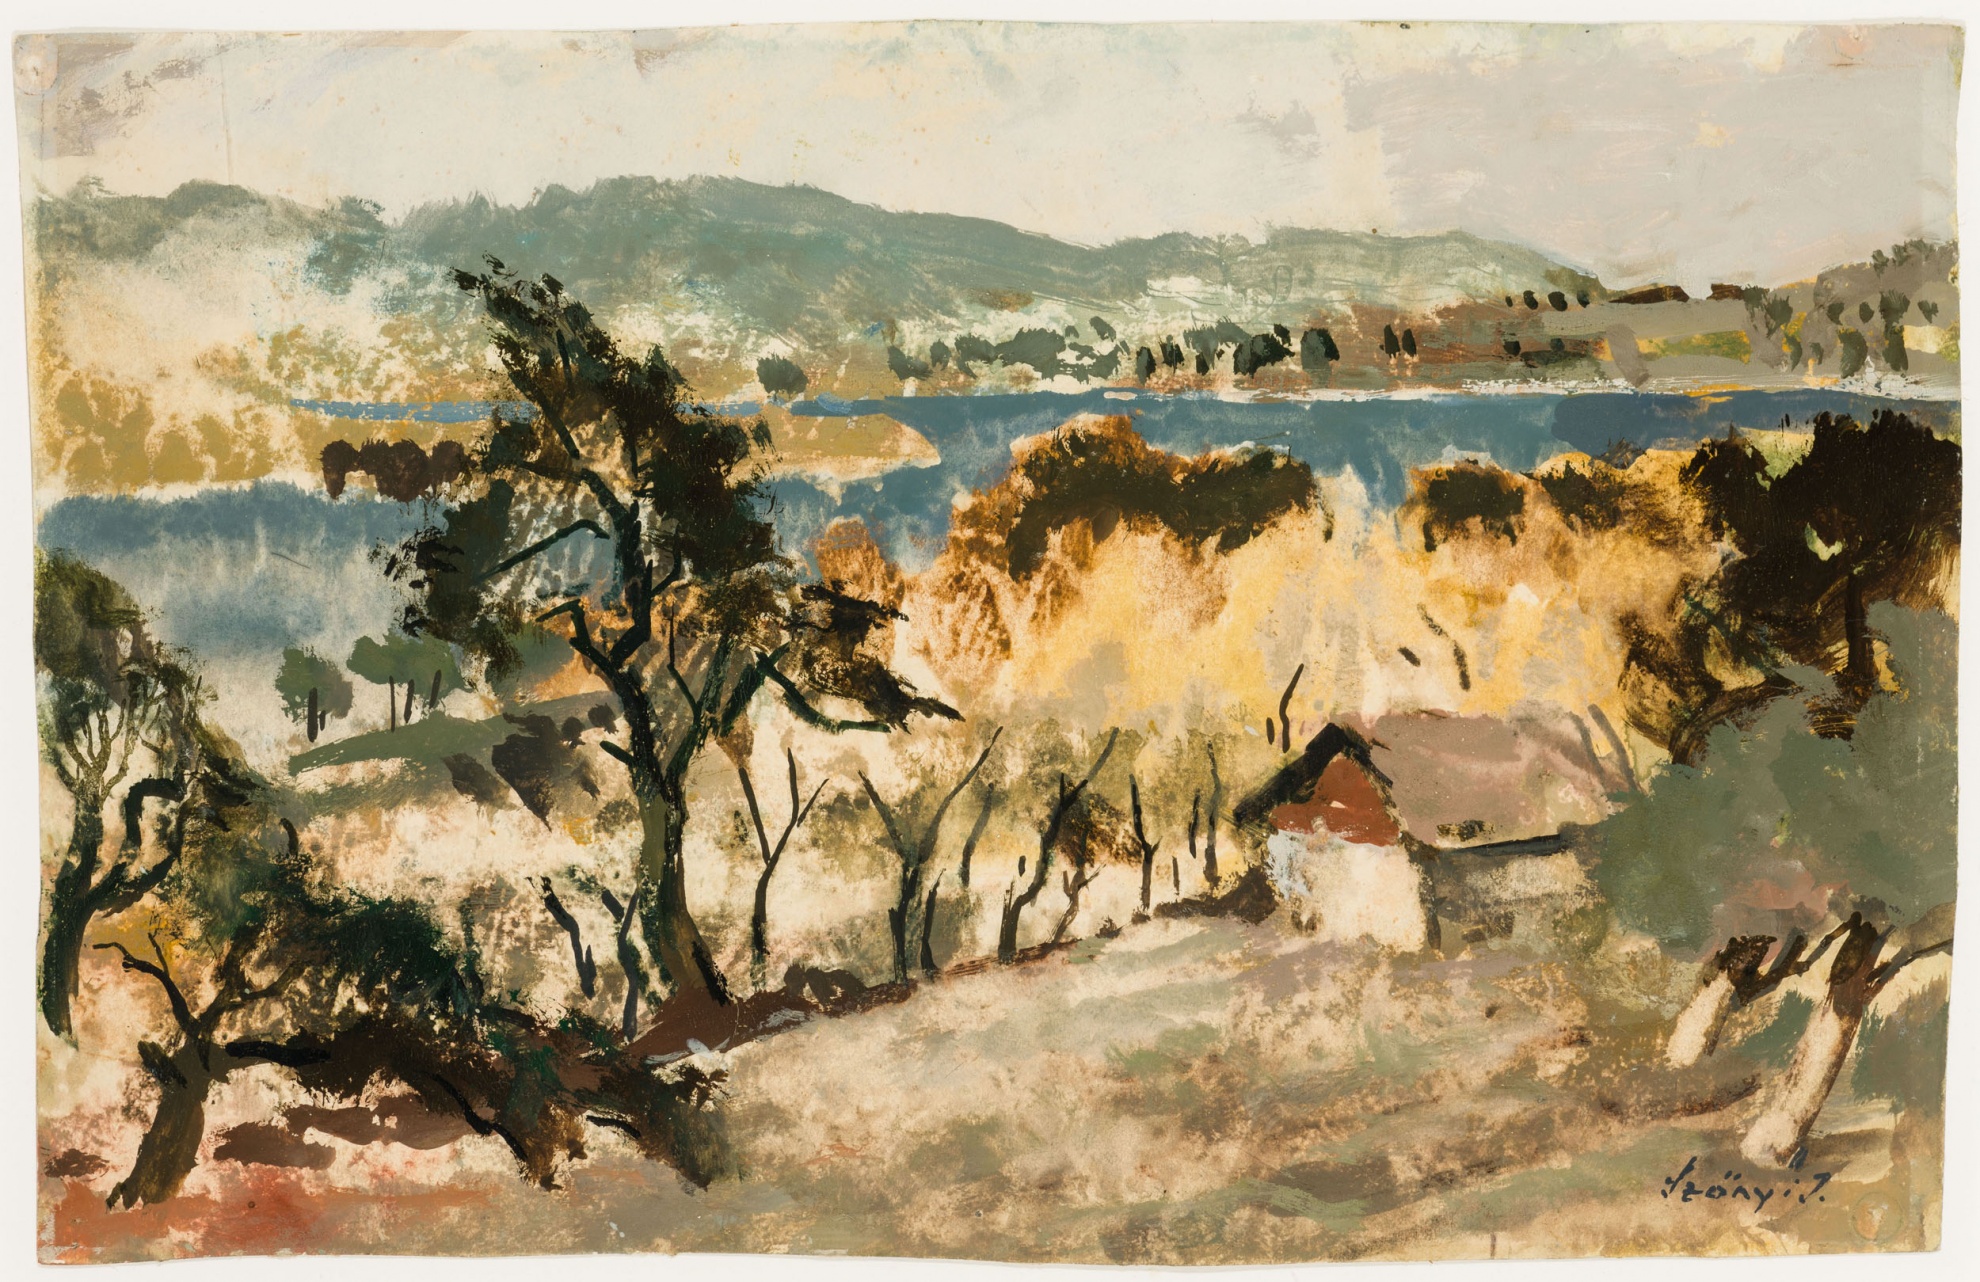 untitled (Zebegény landscape with Danube River)

(The Salgo Trust for Education CC BY-NC-SA)